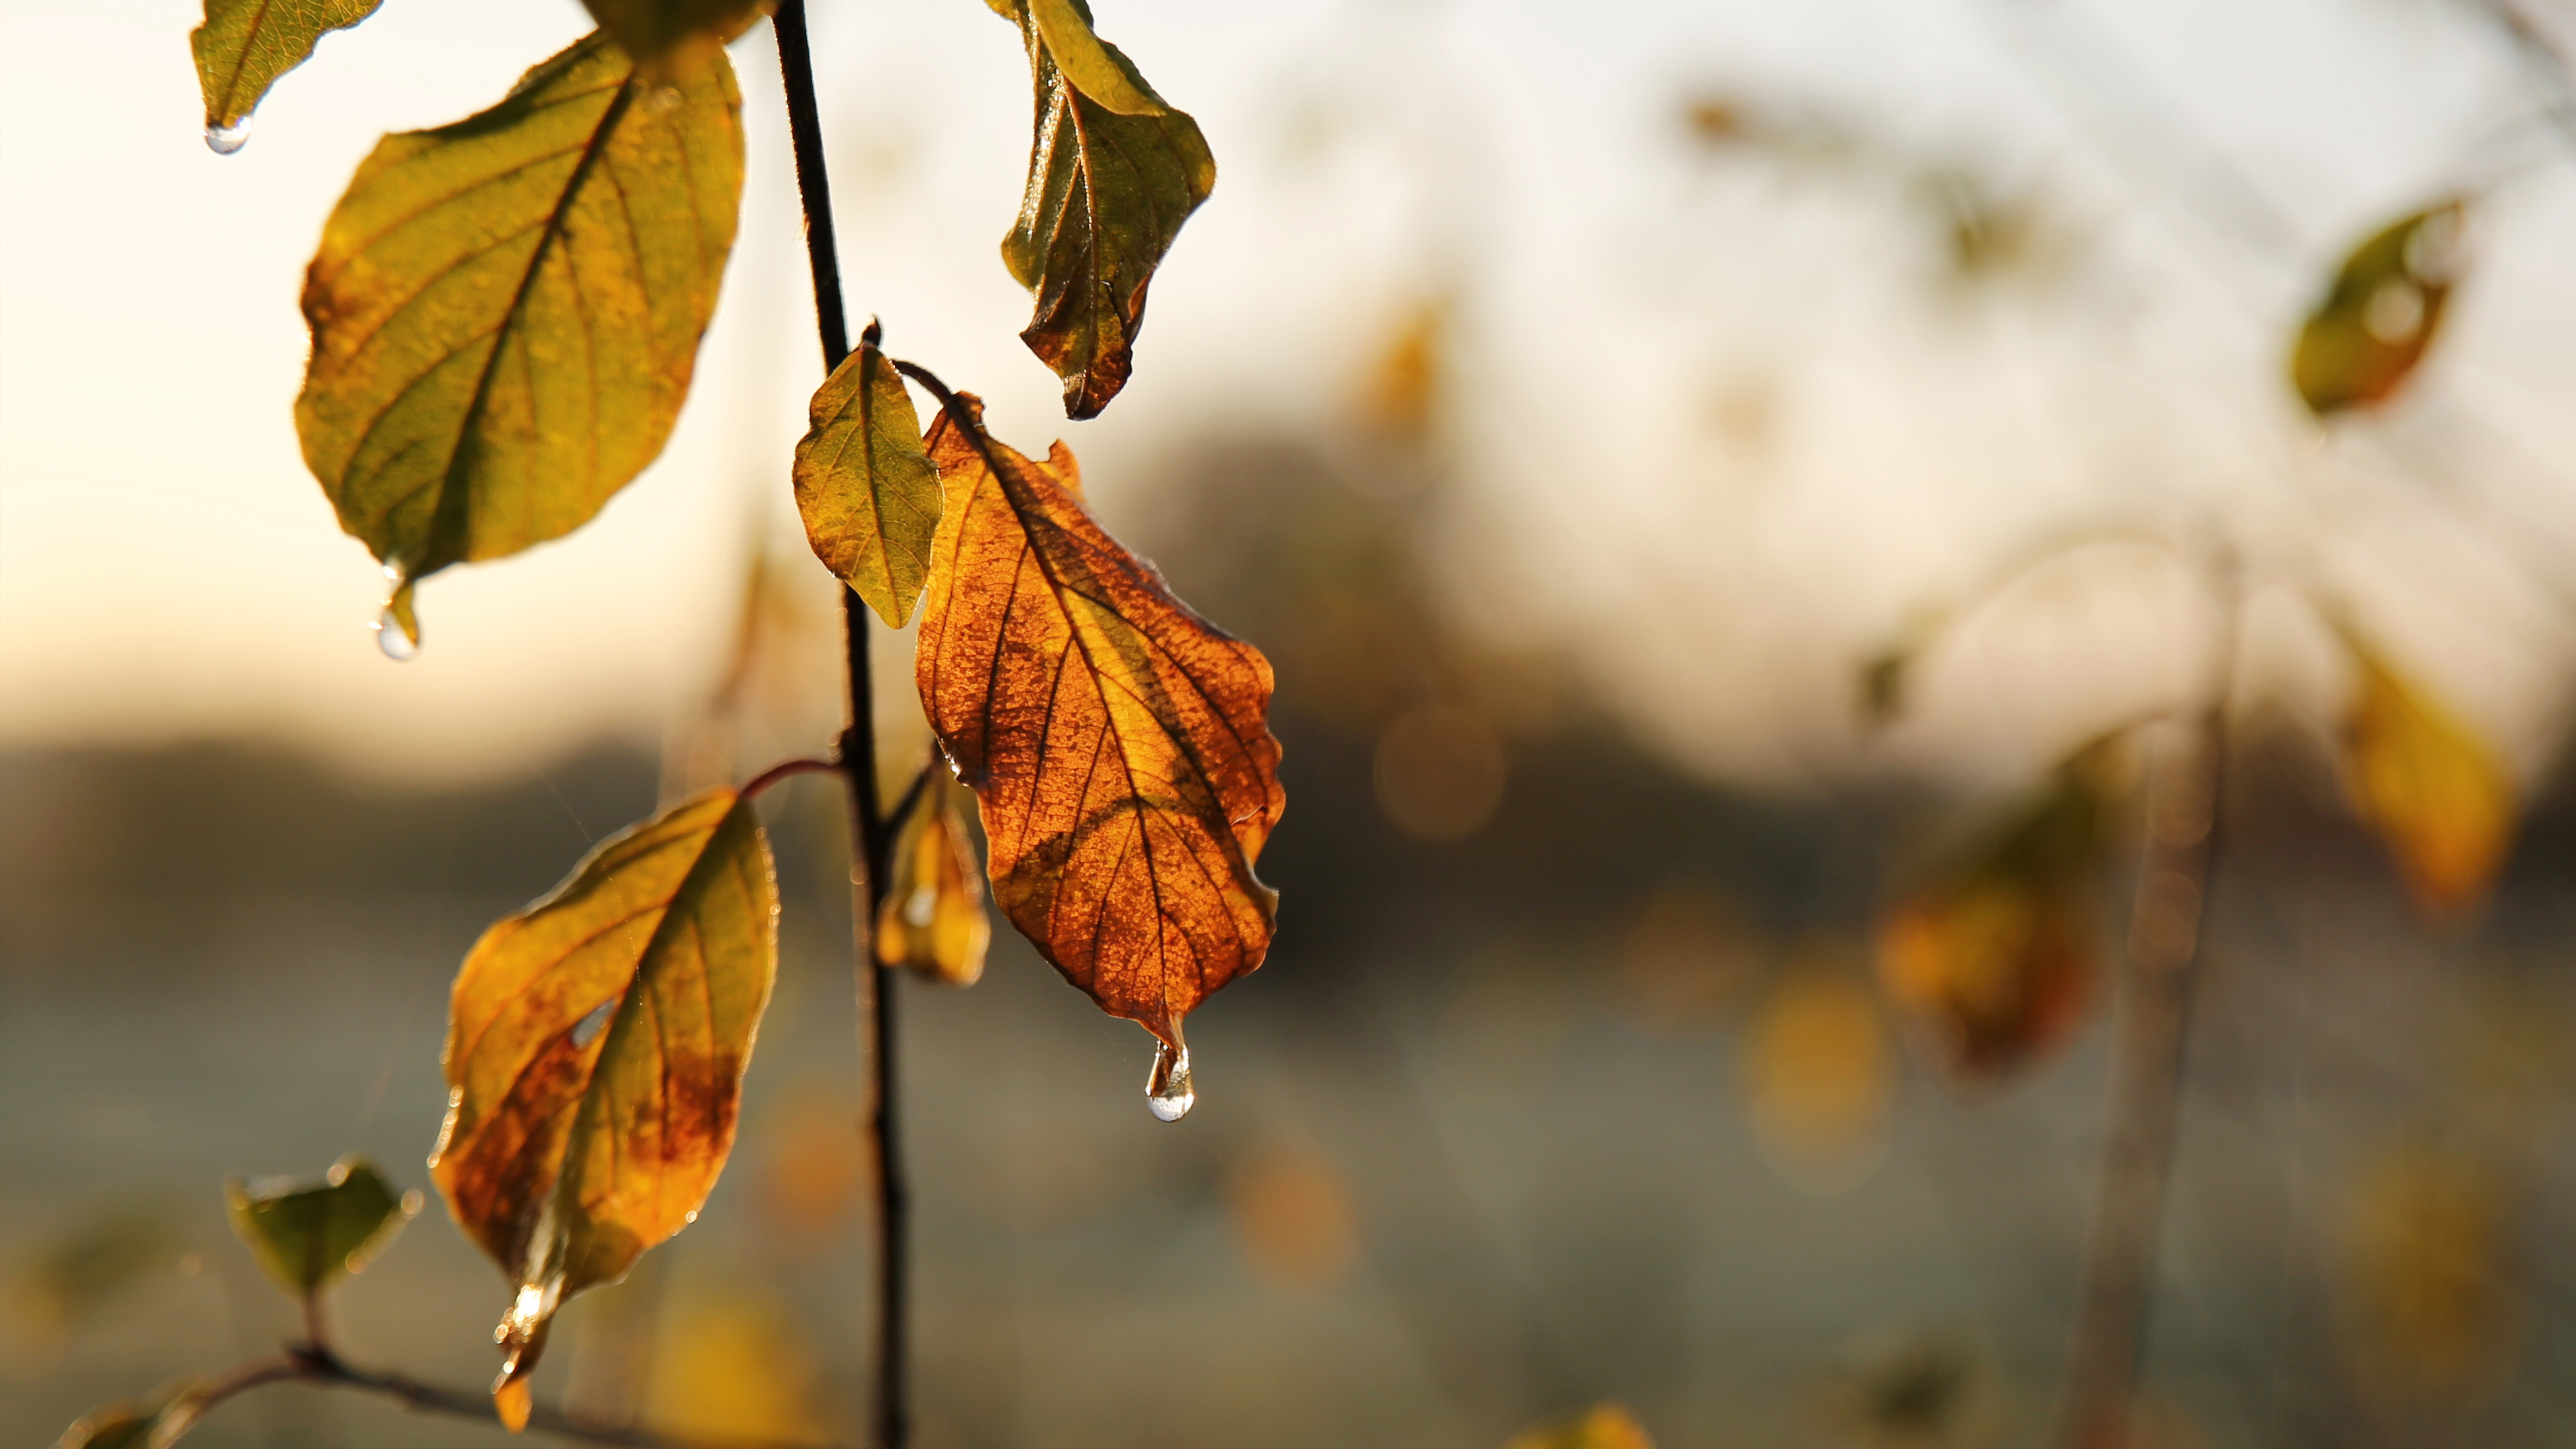 General 3840x2160 nature leaves fall plants water drops closeup blurry background blurred